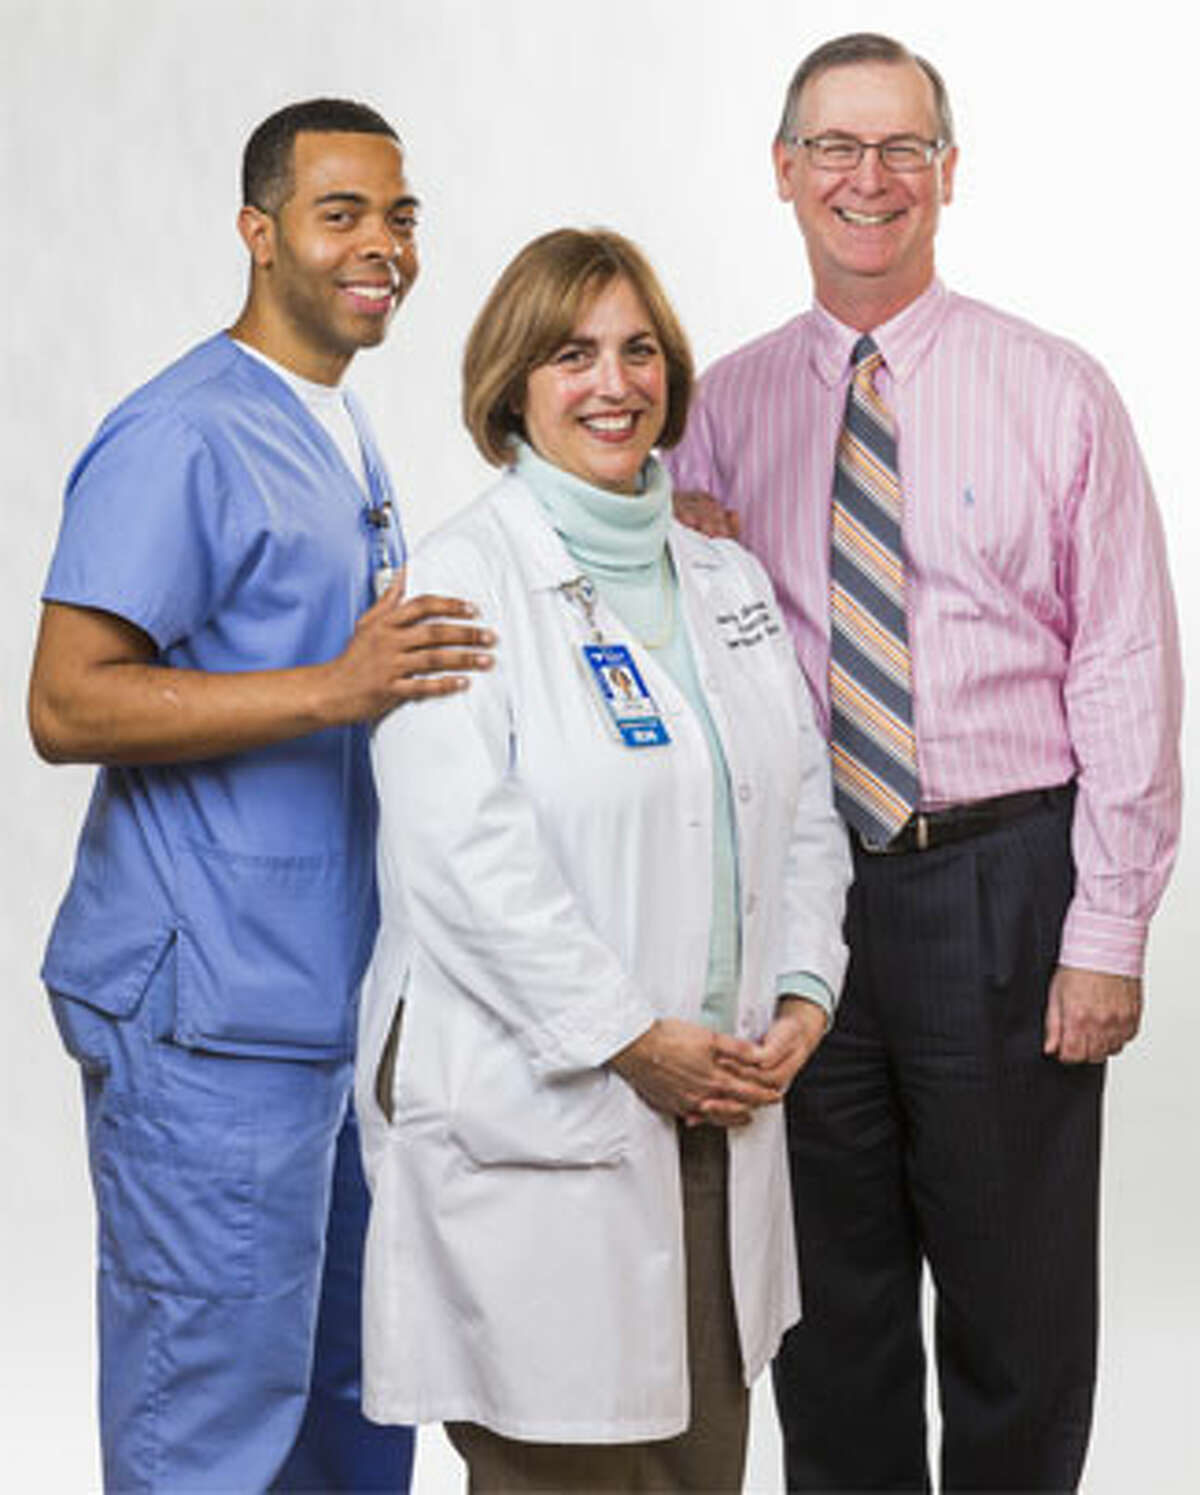 Edward McCreery III of Shelton, right, is shown with Emergency Department Director Anita Shrum and Charles Staples.